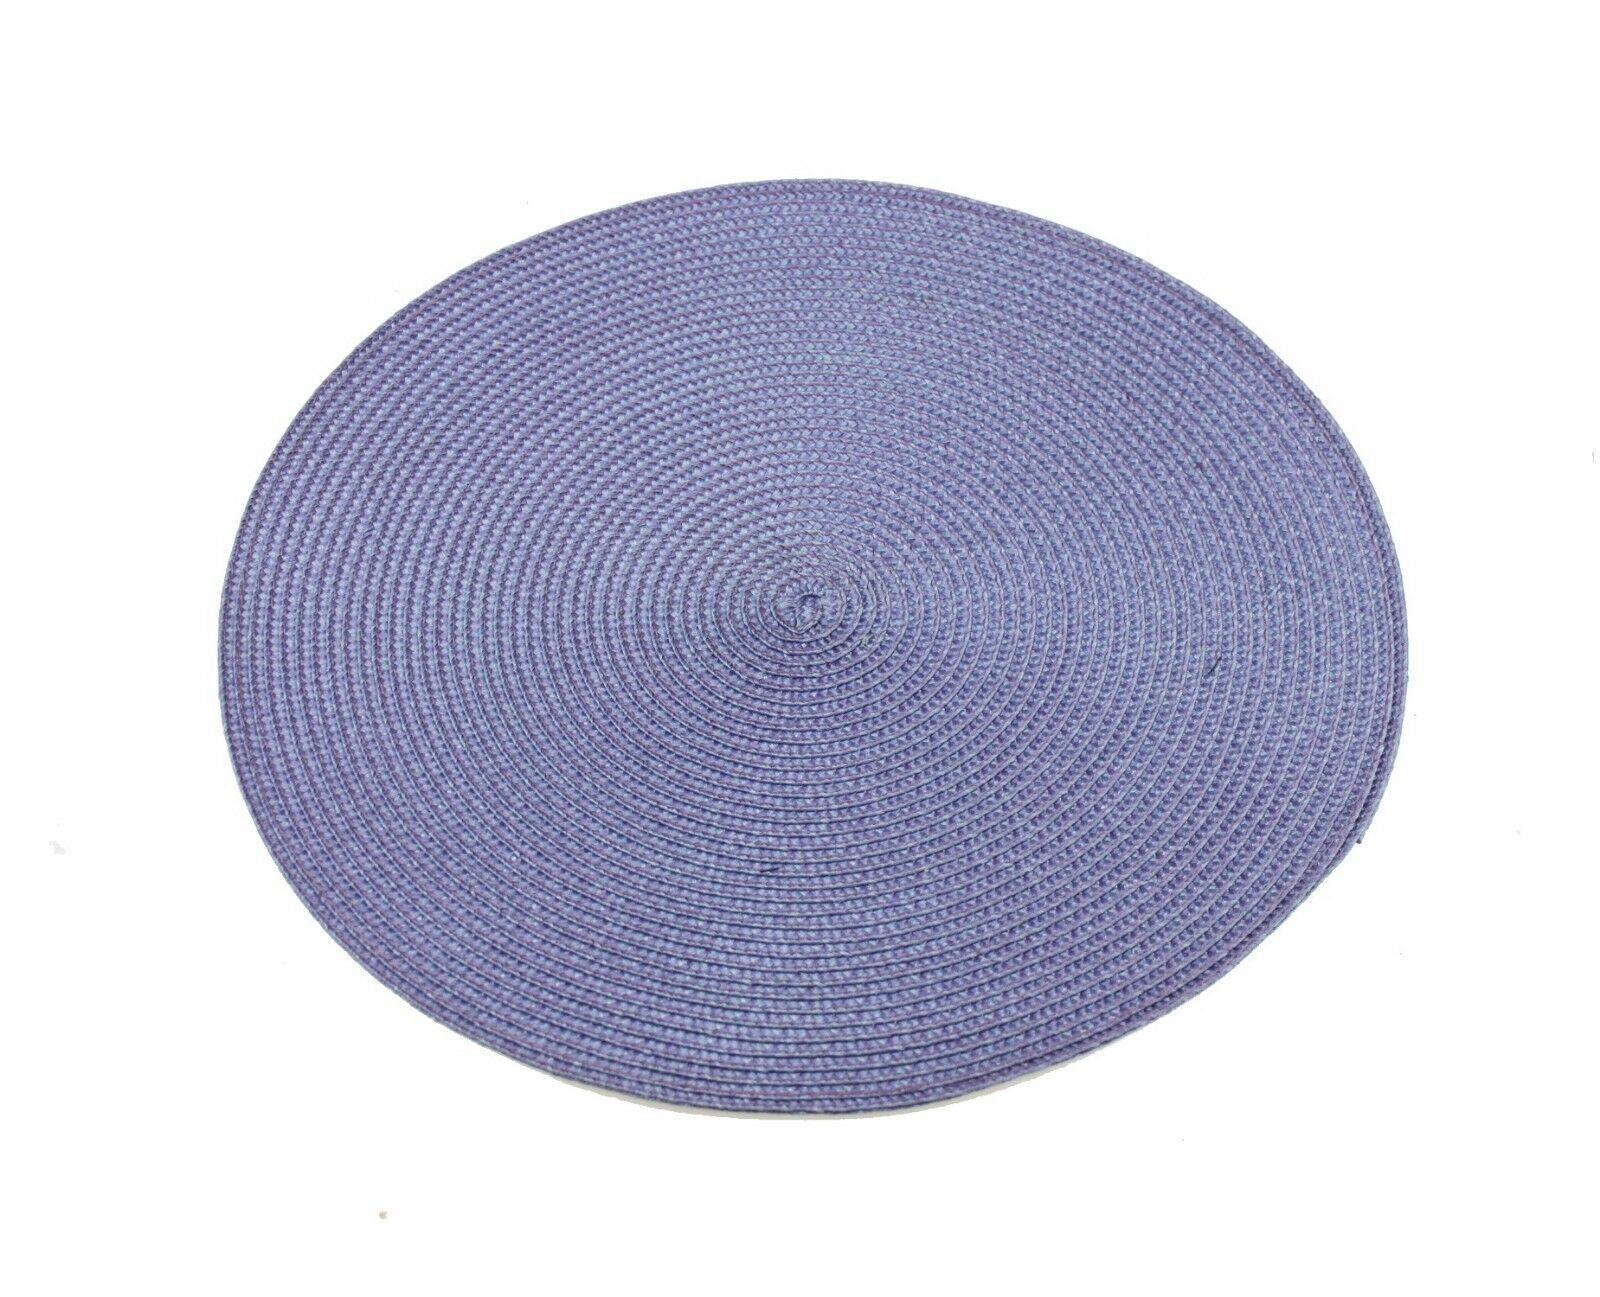 2 x 37cm Round Woven Fabric Placemats Table Setting Place Mats Dining Room